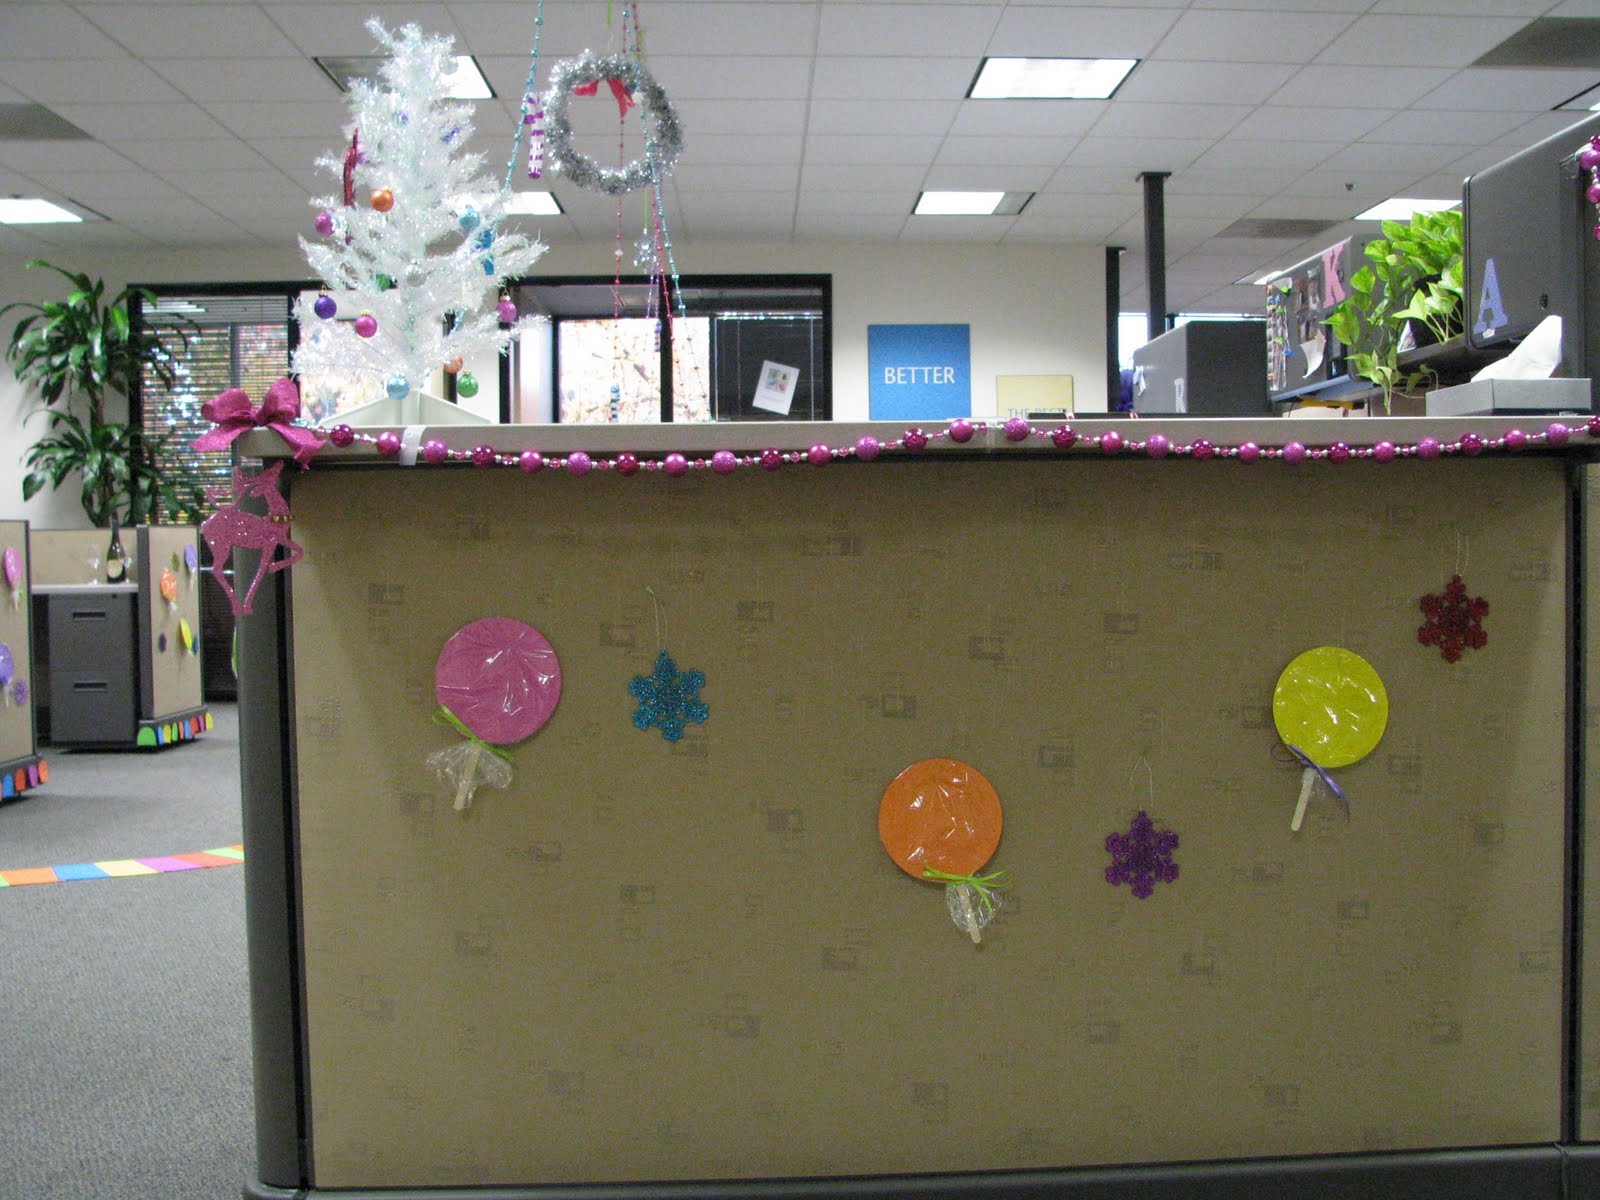 Foreverstronger: Christmas Candy Land at work